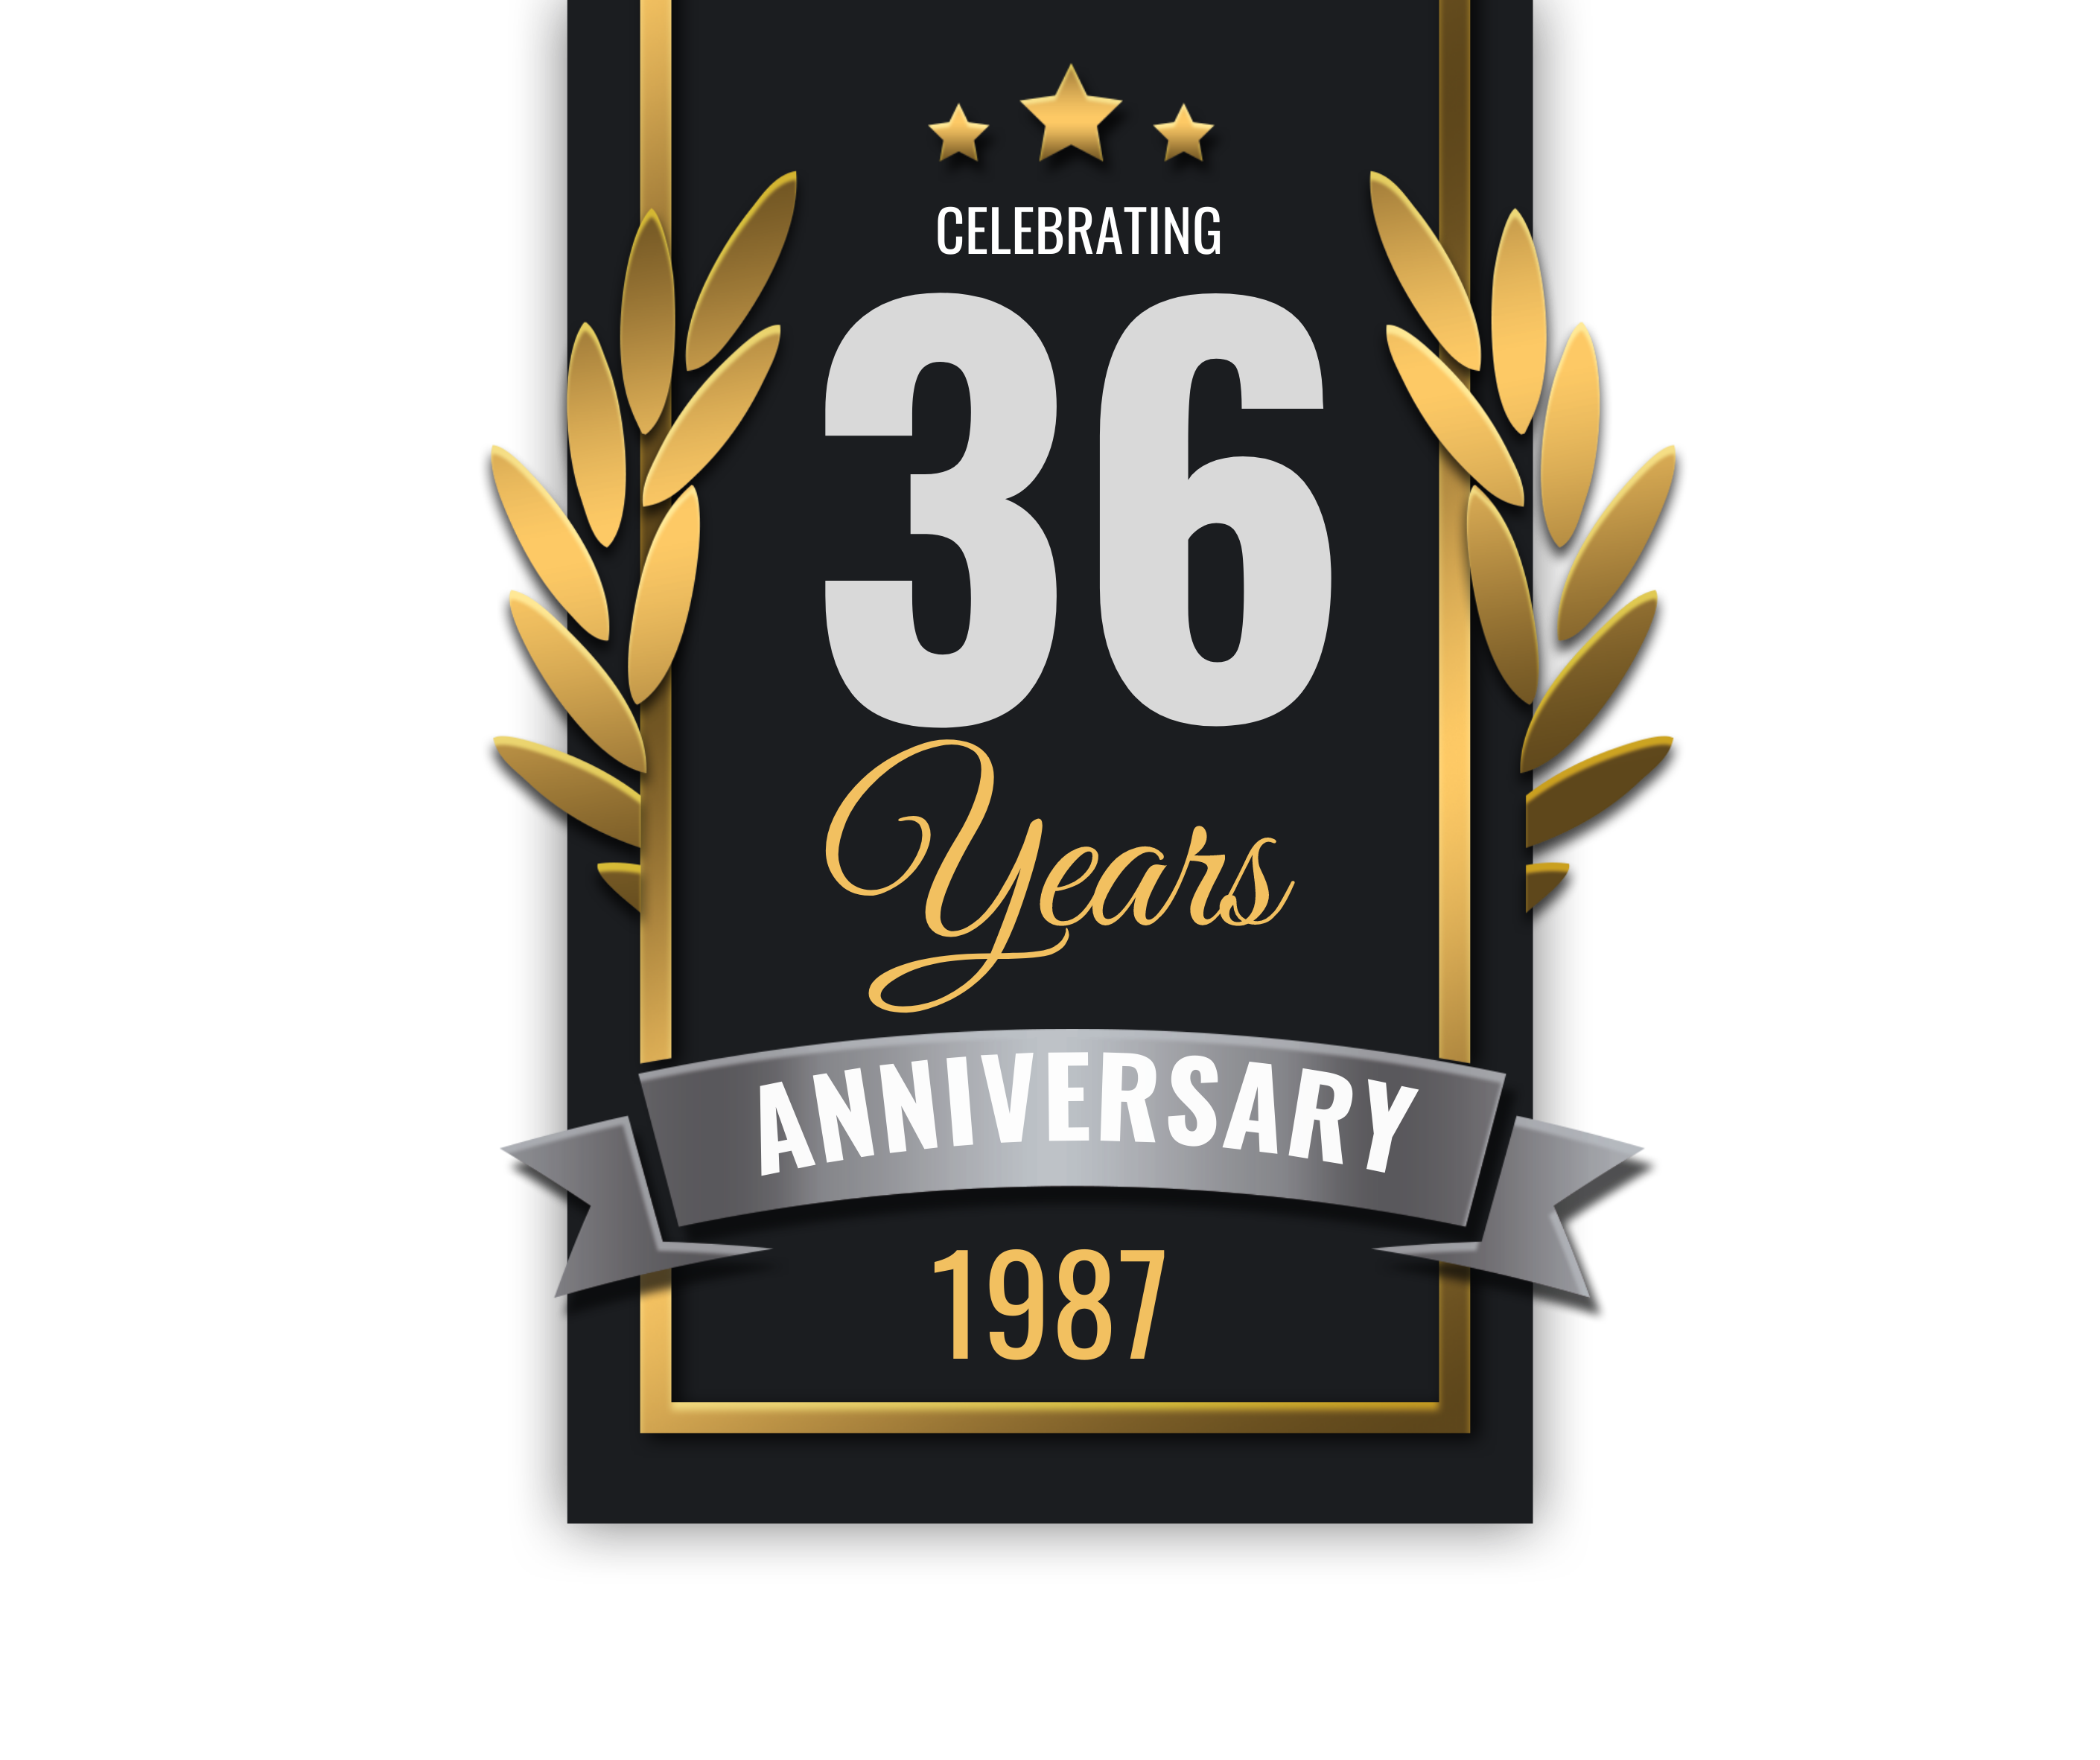 Suburban Septic Services is Celebrating 36 Years in Business - Family-Owned & Operated Since 1987